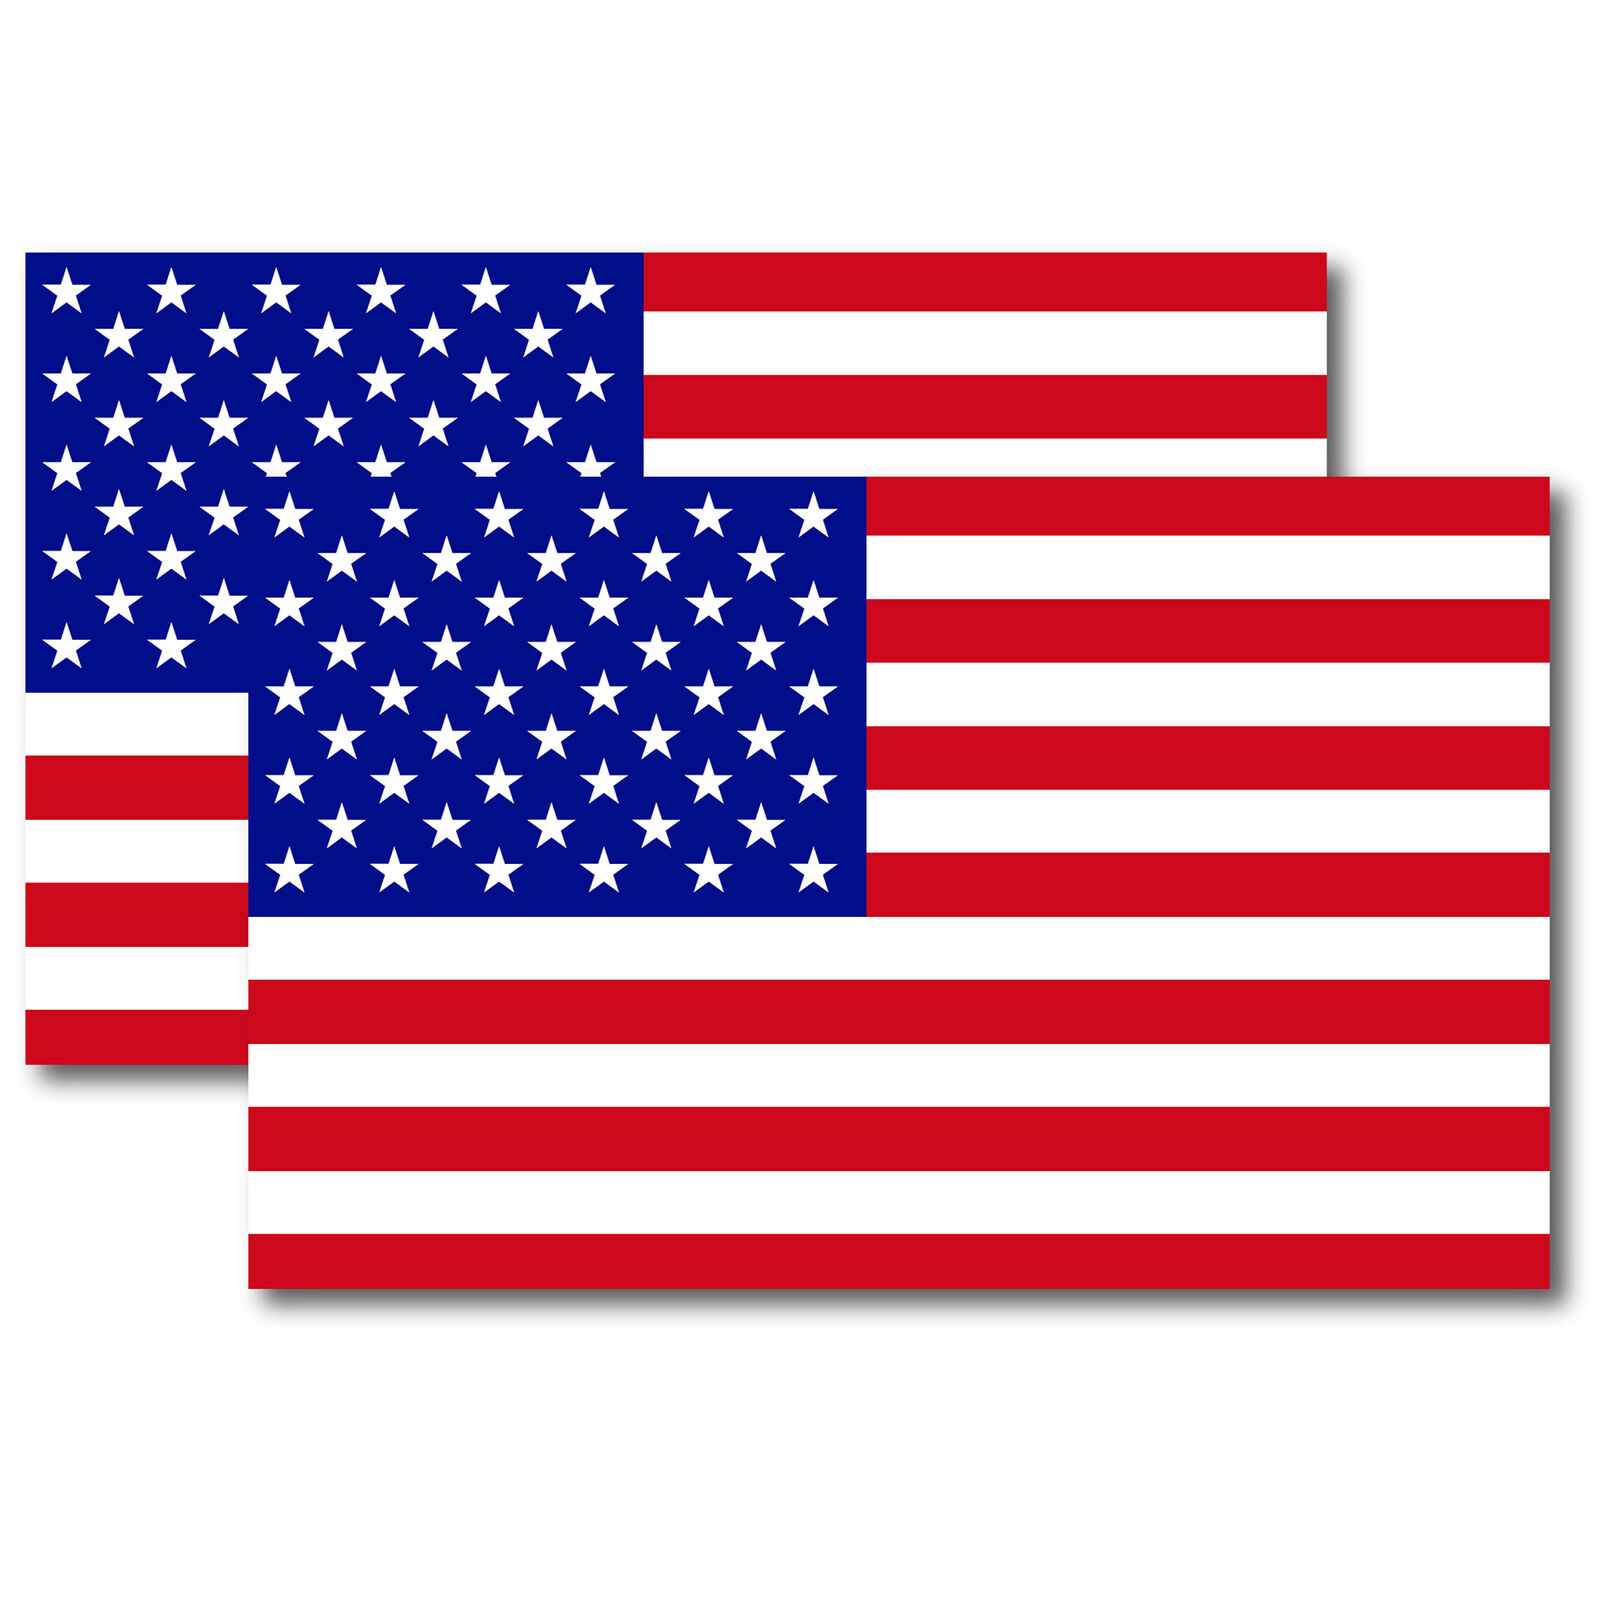 American Flag Automotive Magnet Decal, 5x8 inches, 2 Pack, Red White, and Blue